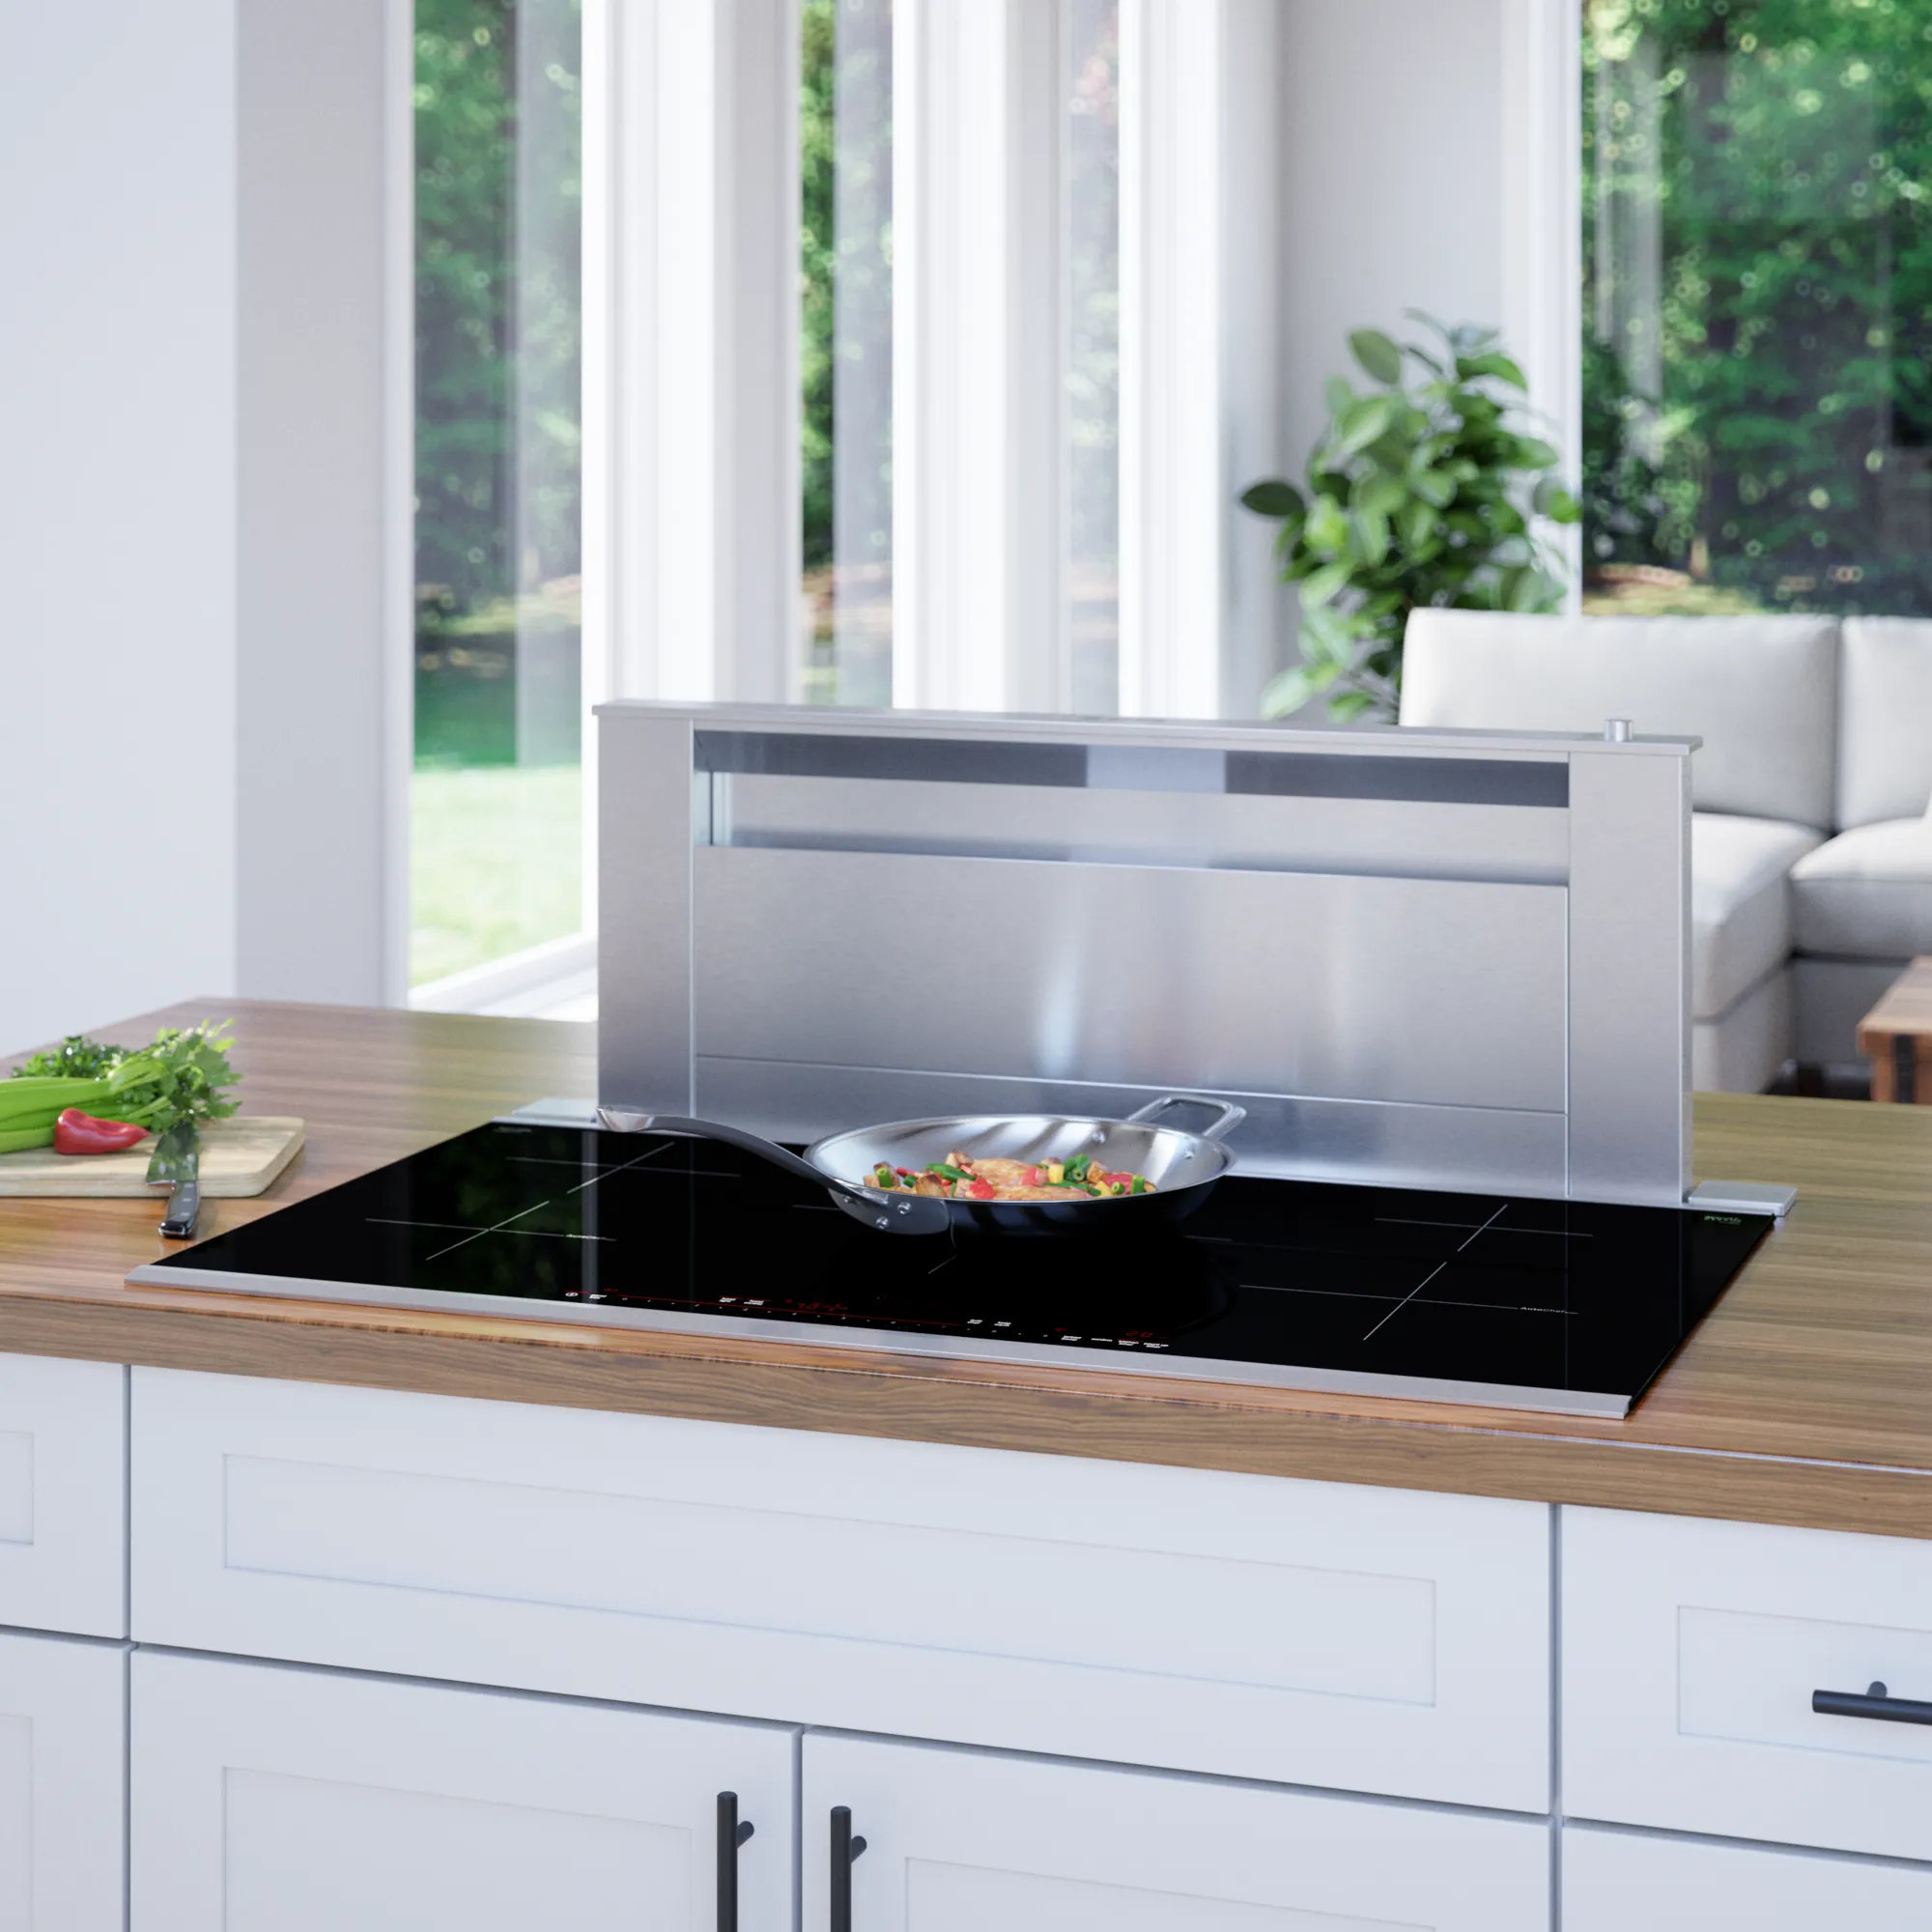 Bosch 800 Series 36 Black Induction Cooktop